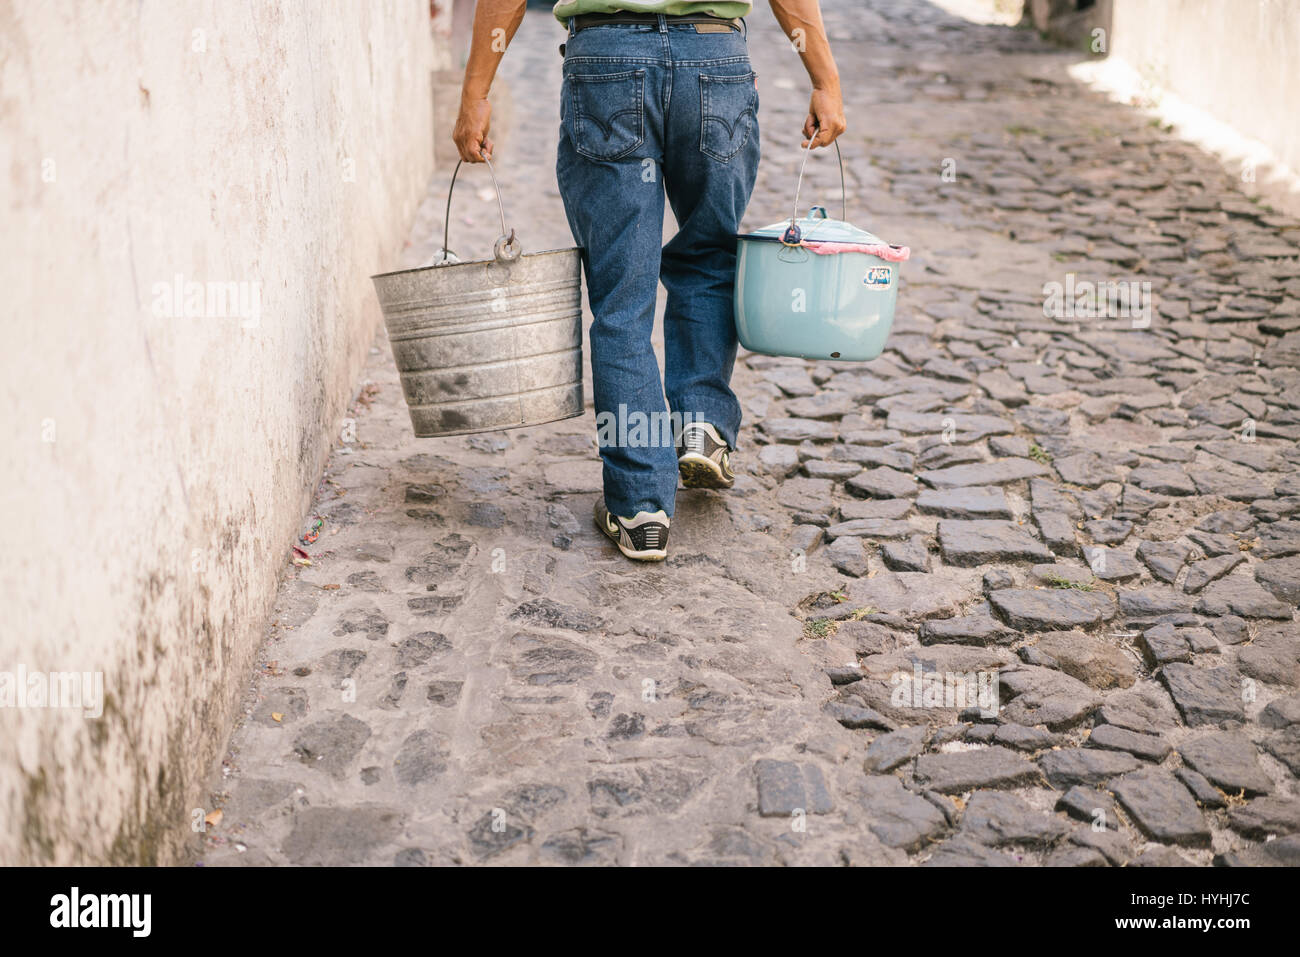 Man carries enamel pots filled with food to sell door to door in Taxco, Mexico. Stock Photo